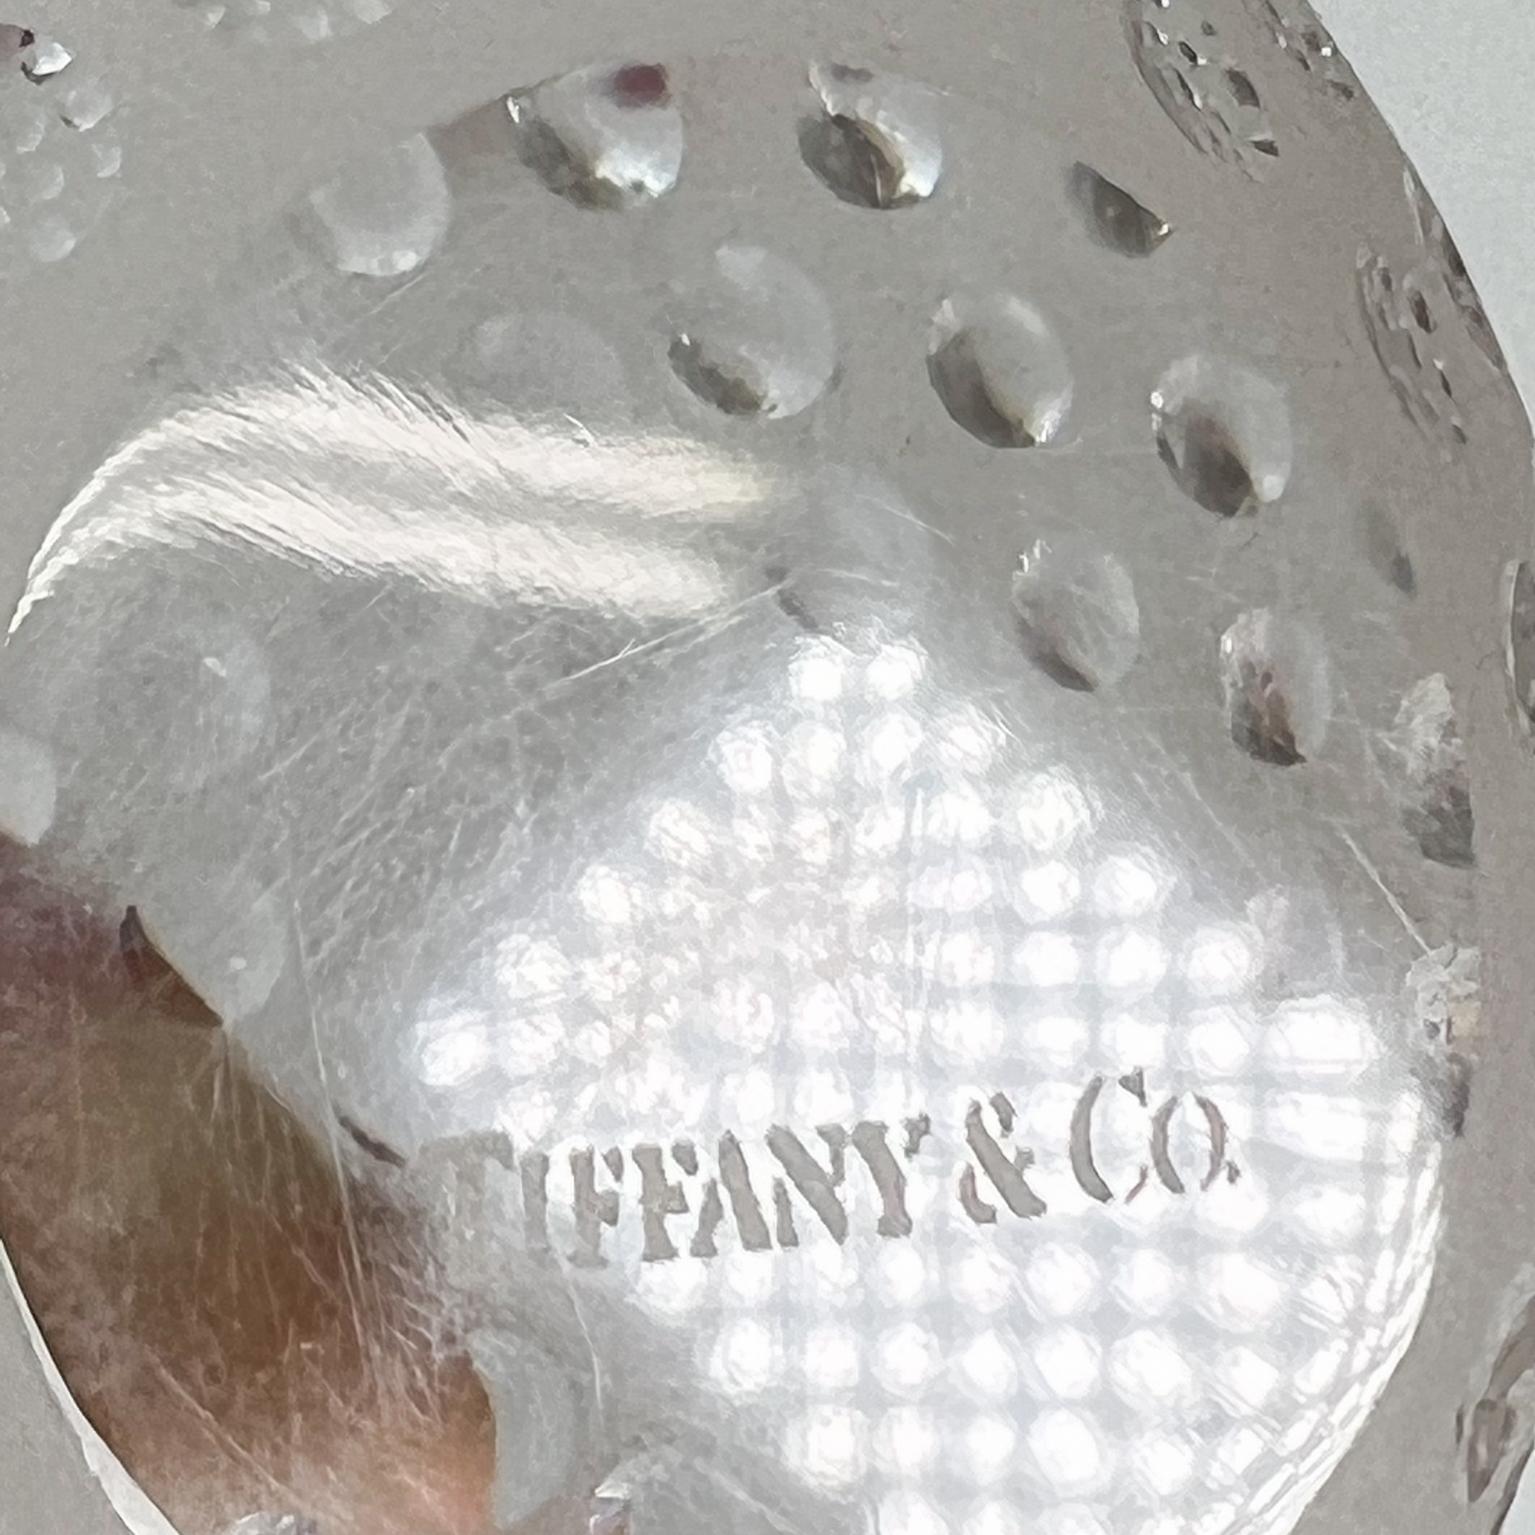 Tiffany & Co Art Glass Crystal Frosted Golf Ball Paperweight Sculpture 5